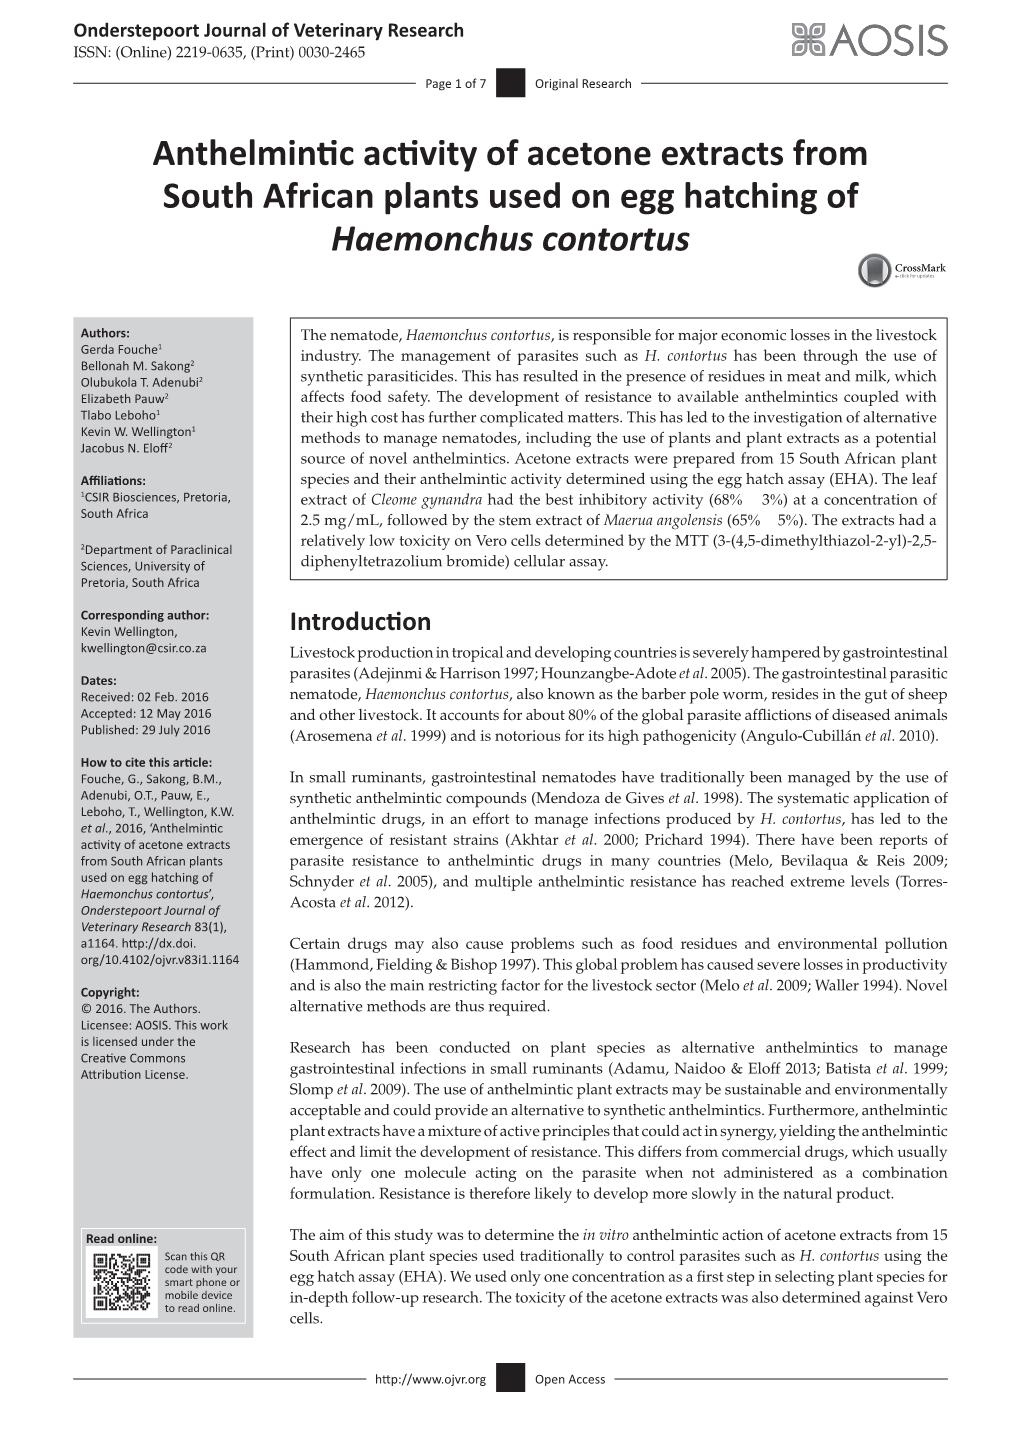 Anthelmintic Activity of Acetone Extracts from South African Plants Used on Egg Hatching of Haemonchus Contortus